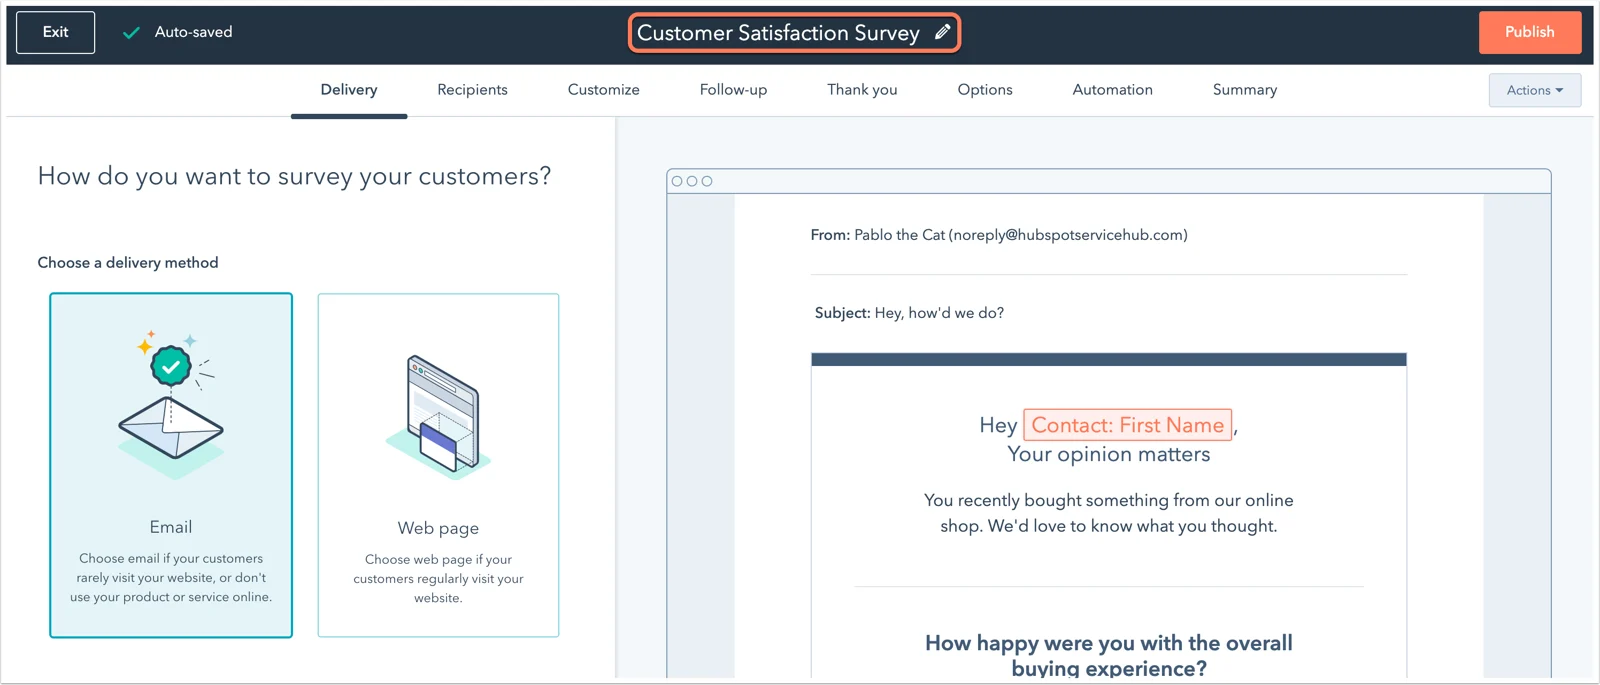 Financial Benefits of Excellent Customer Service, Click 'Create' and Customize: